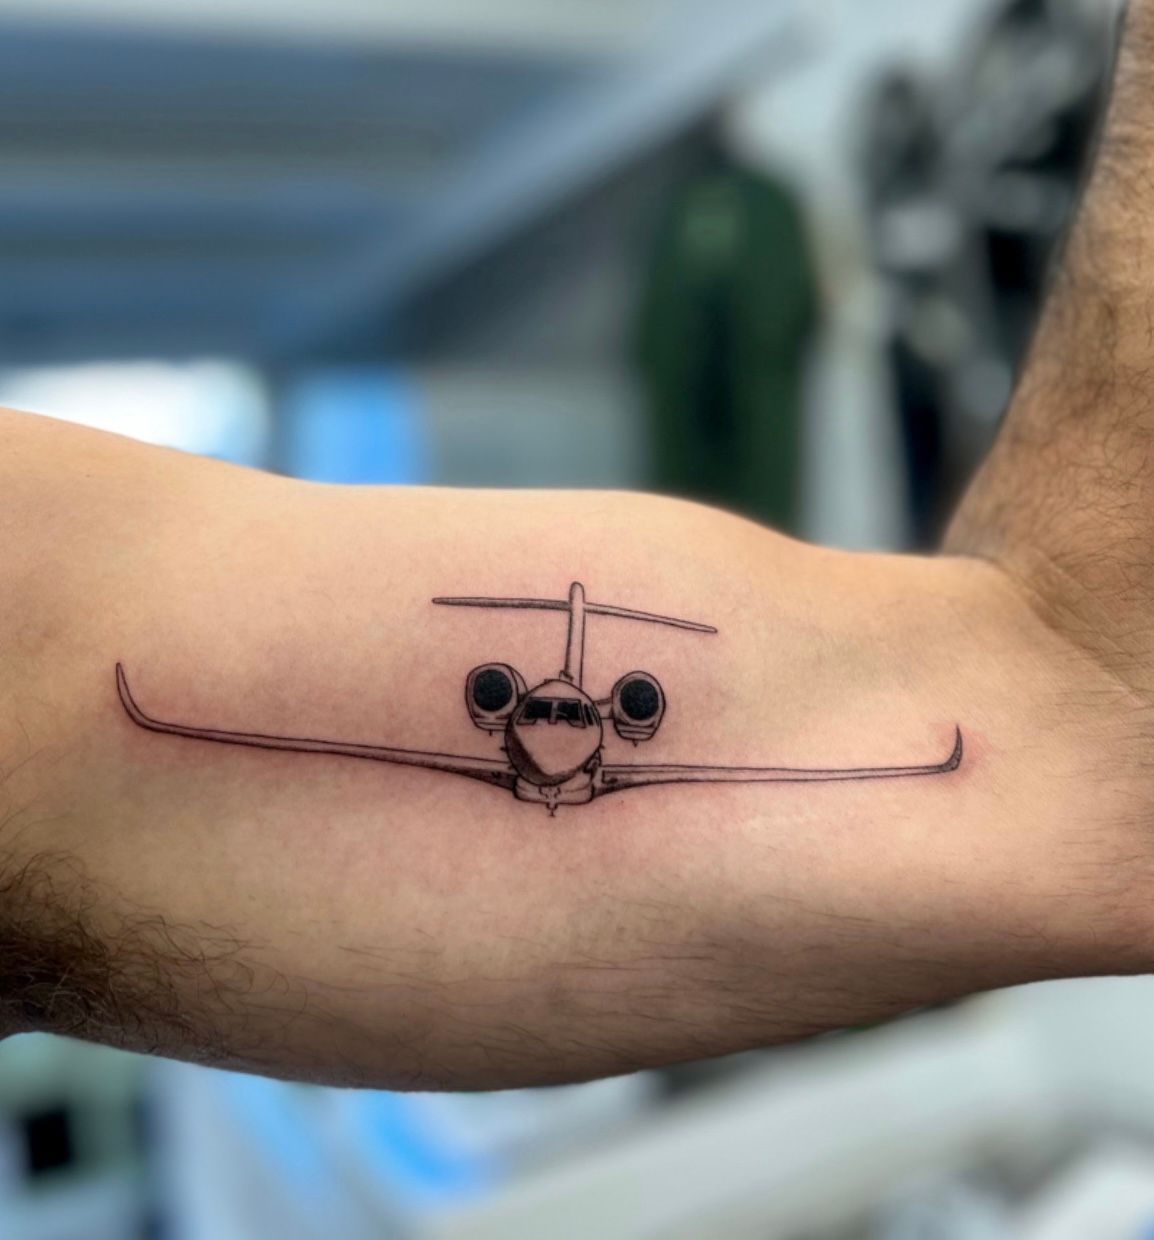 Small AirPlane Tattoo On Right Foot